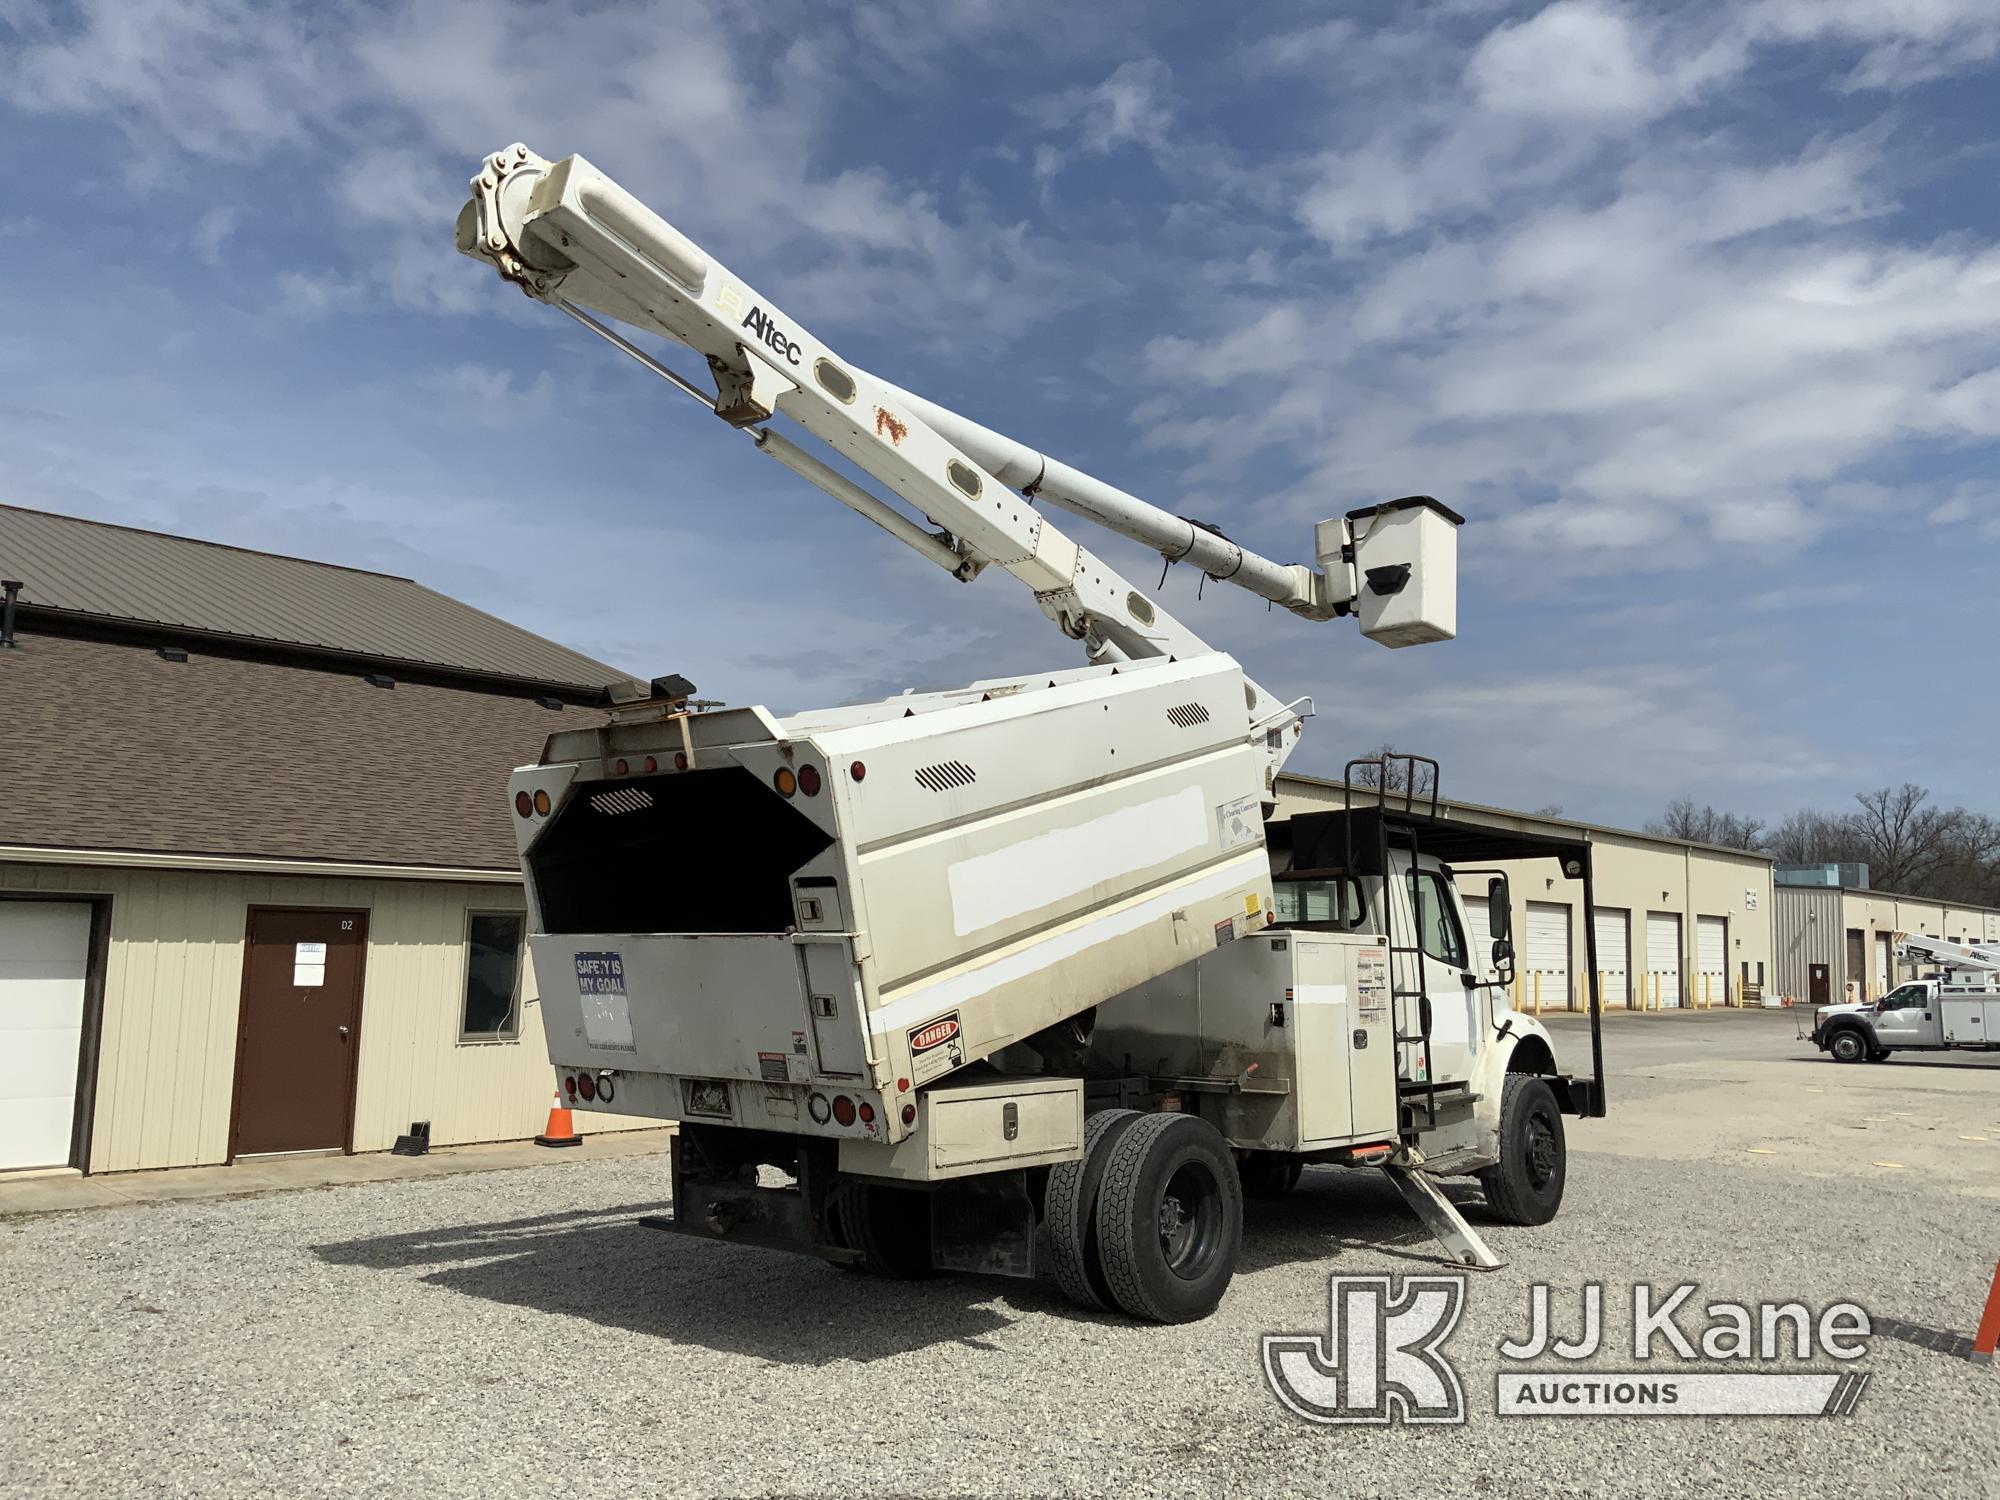 (Fort Wayne, IN) Altec LR756, Over-Center Bucket Truck mounted behind cab on 2014 Freightliner M2 10